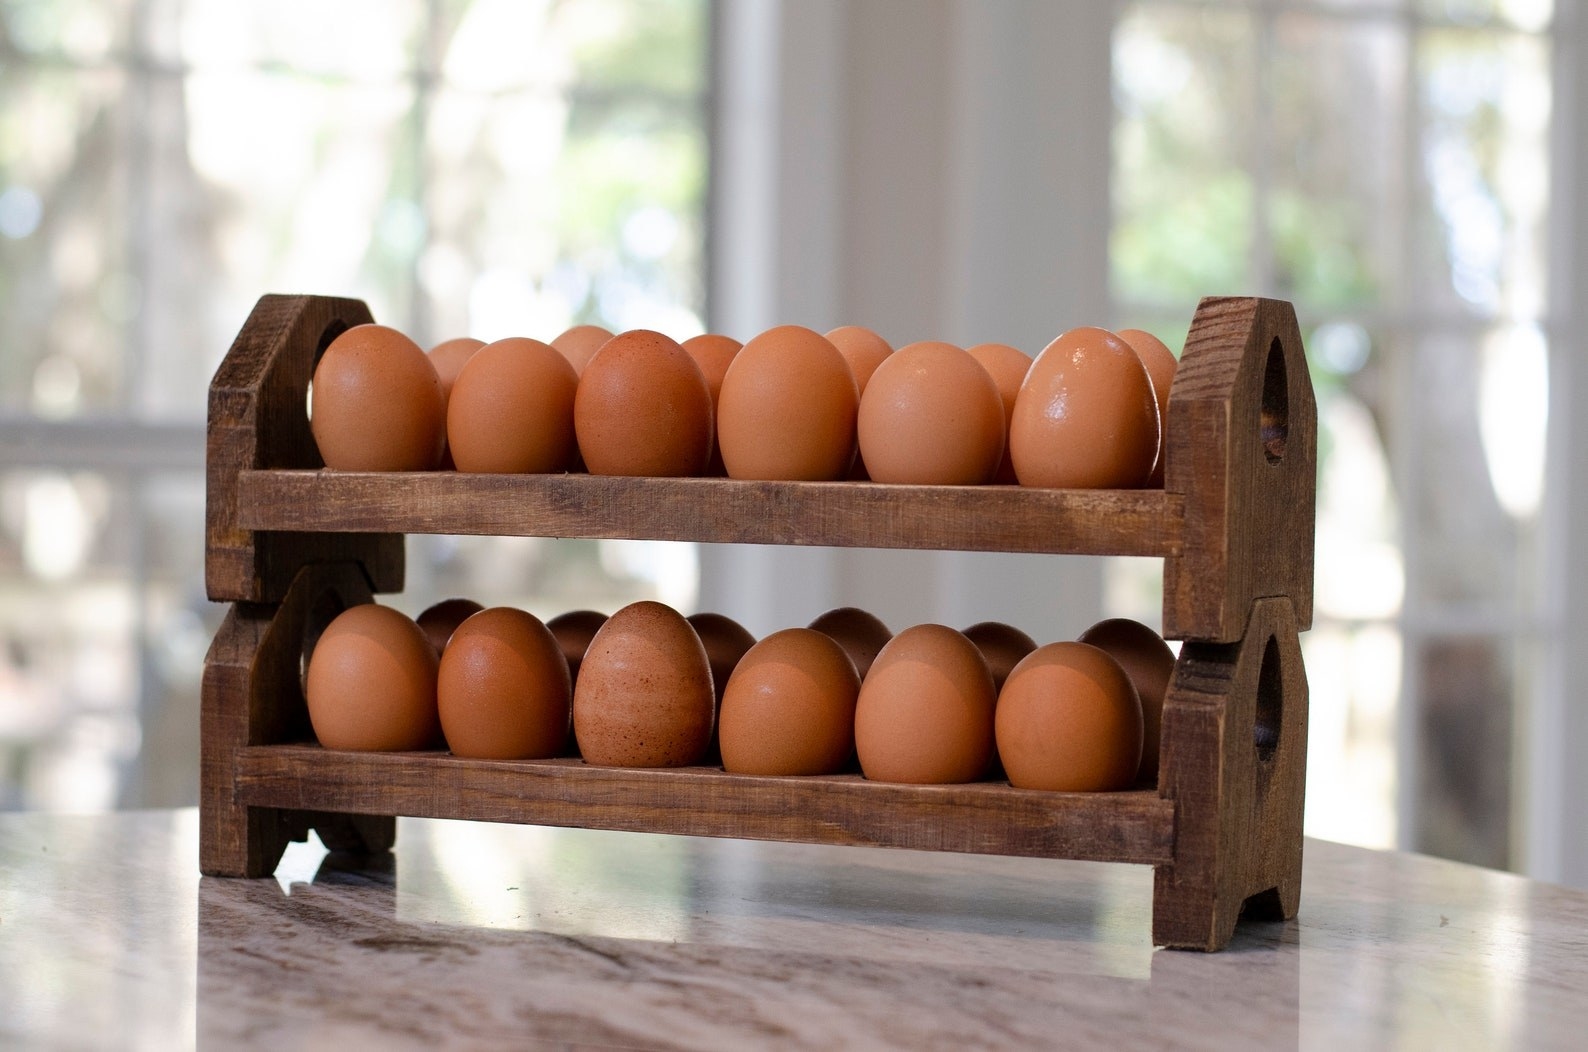 The egg tray stacked on top of another one with eggs on it